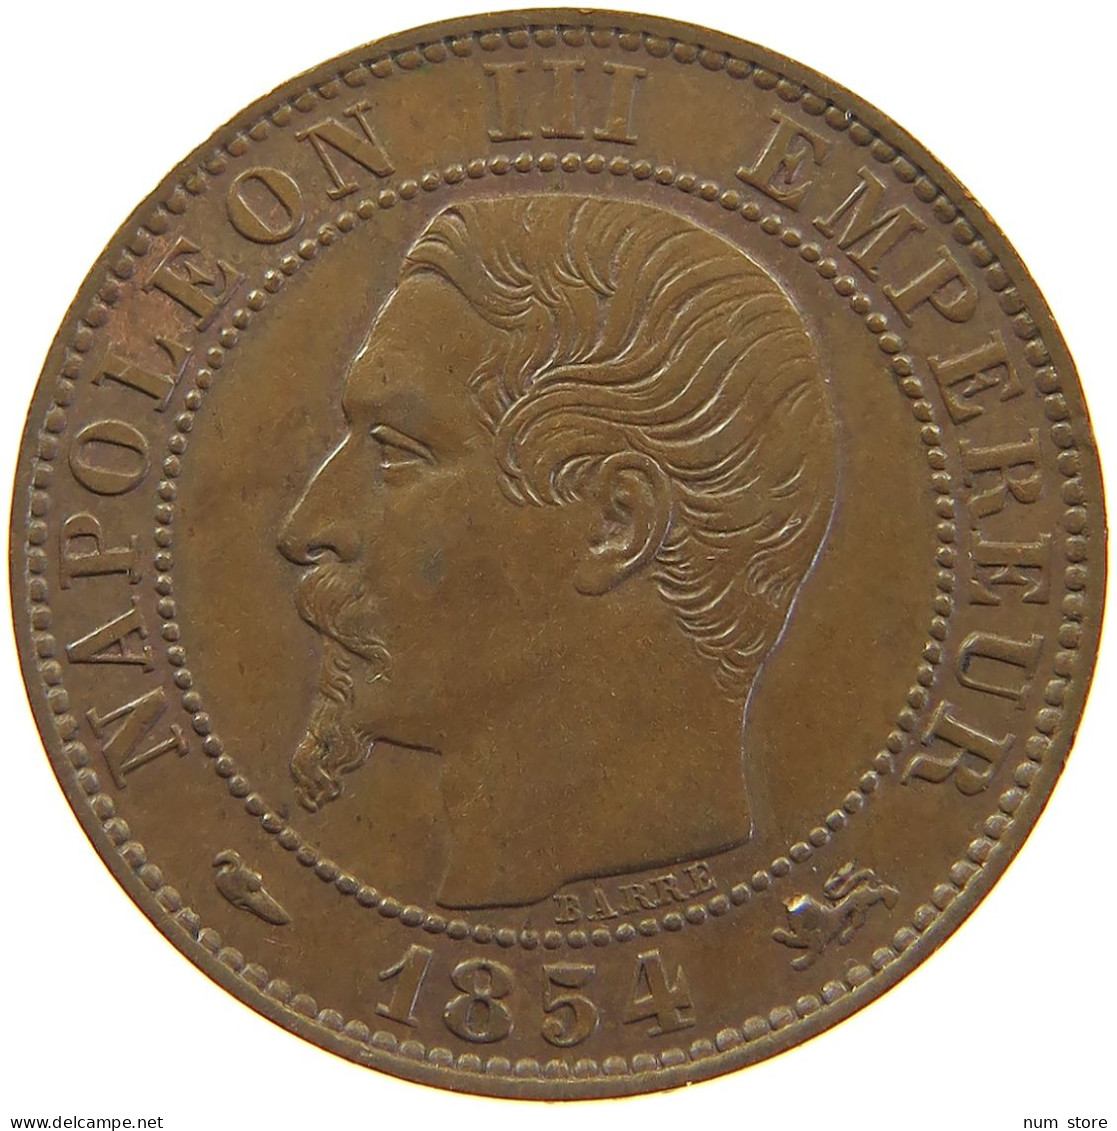 FRANCE 5 CENTIMES 1854 D Napoleon III. (1852-1870) #t016 0183 - 5 Centimes